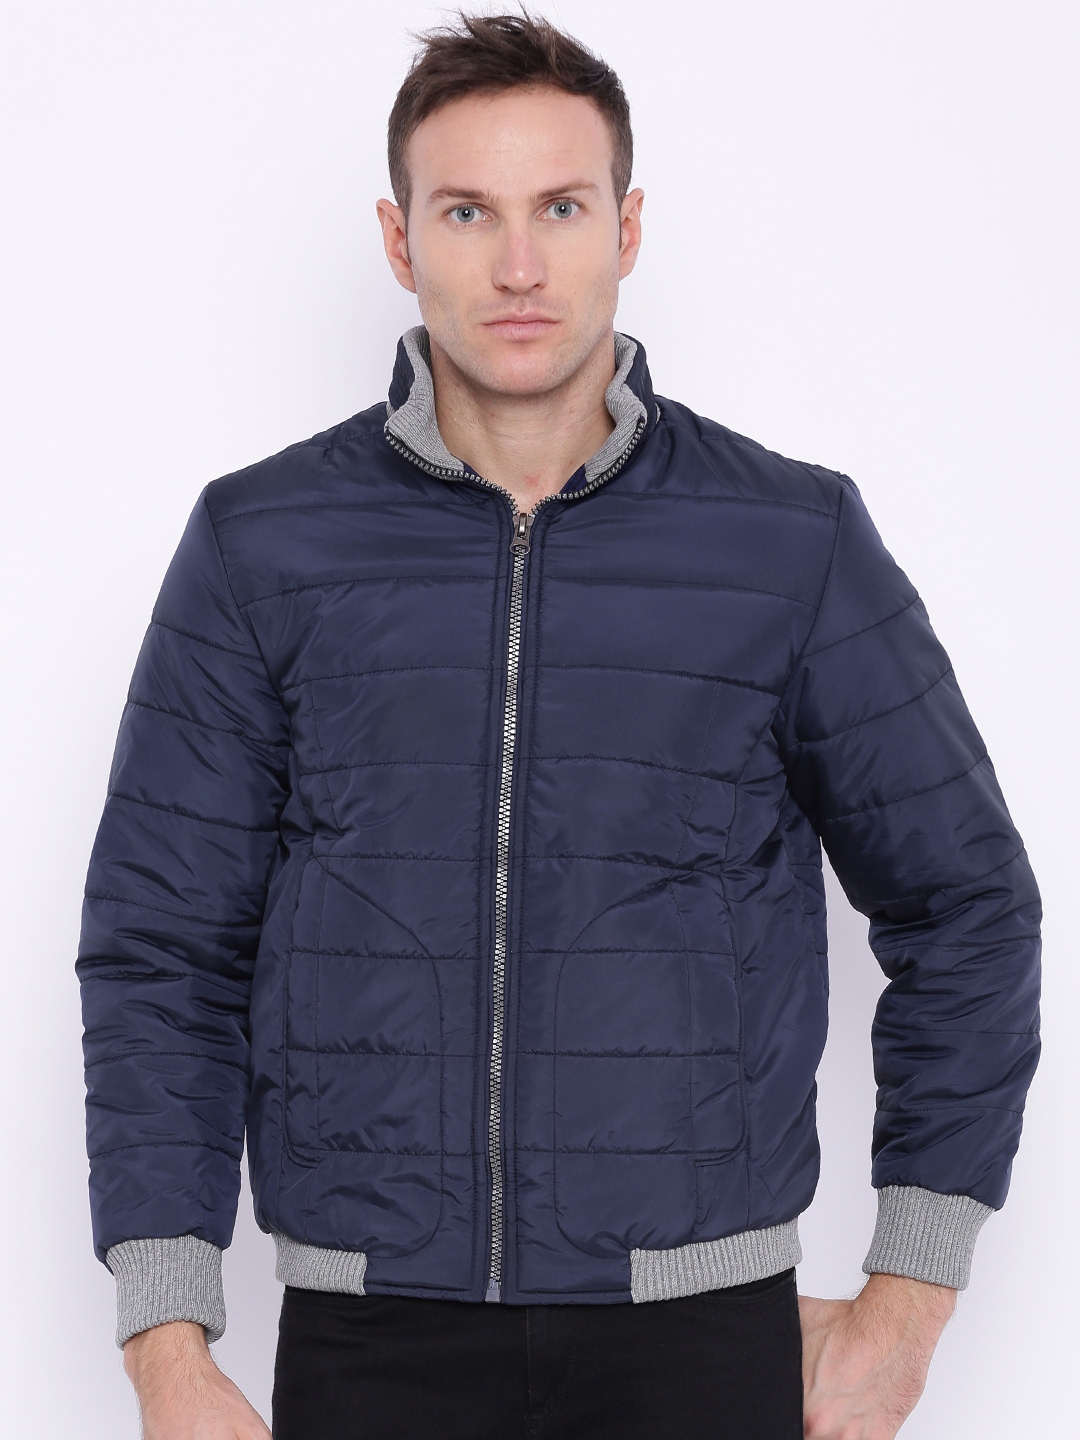 Buy Nature Casuals Navy Padded Jacket - Jackets for Men 1511711 | Myntra